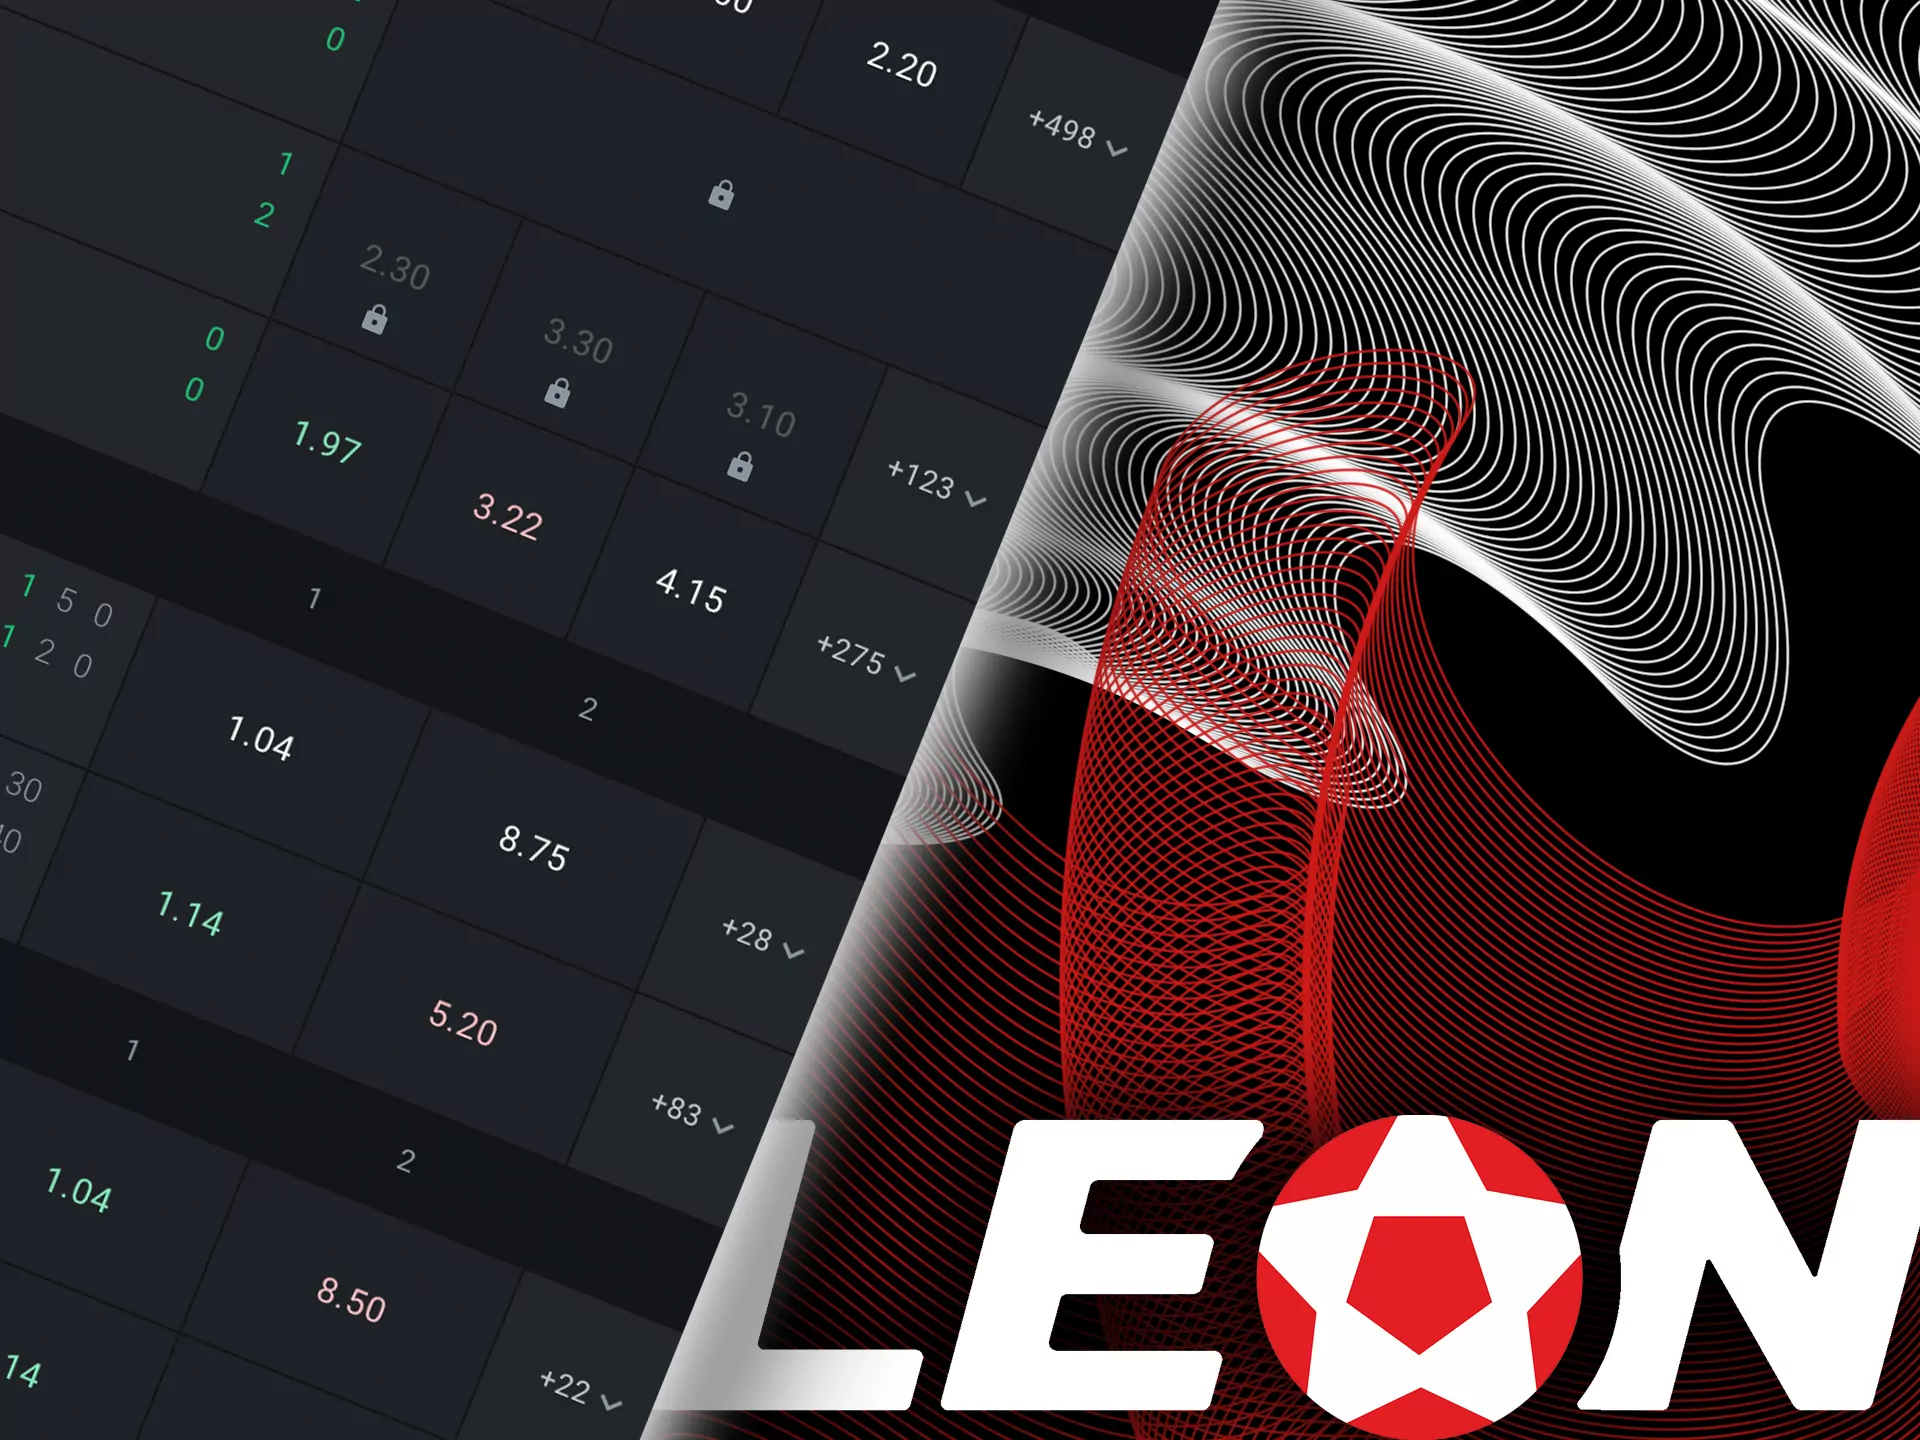 You can find profitable odds on many sports events in Leon.